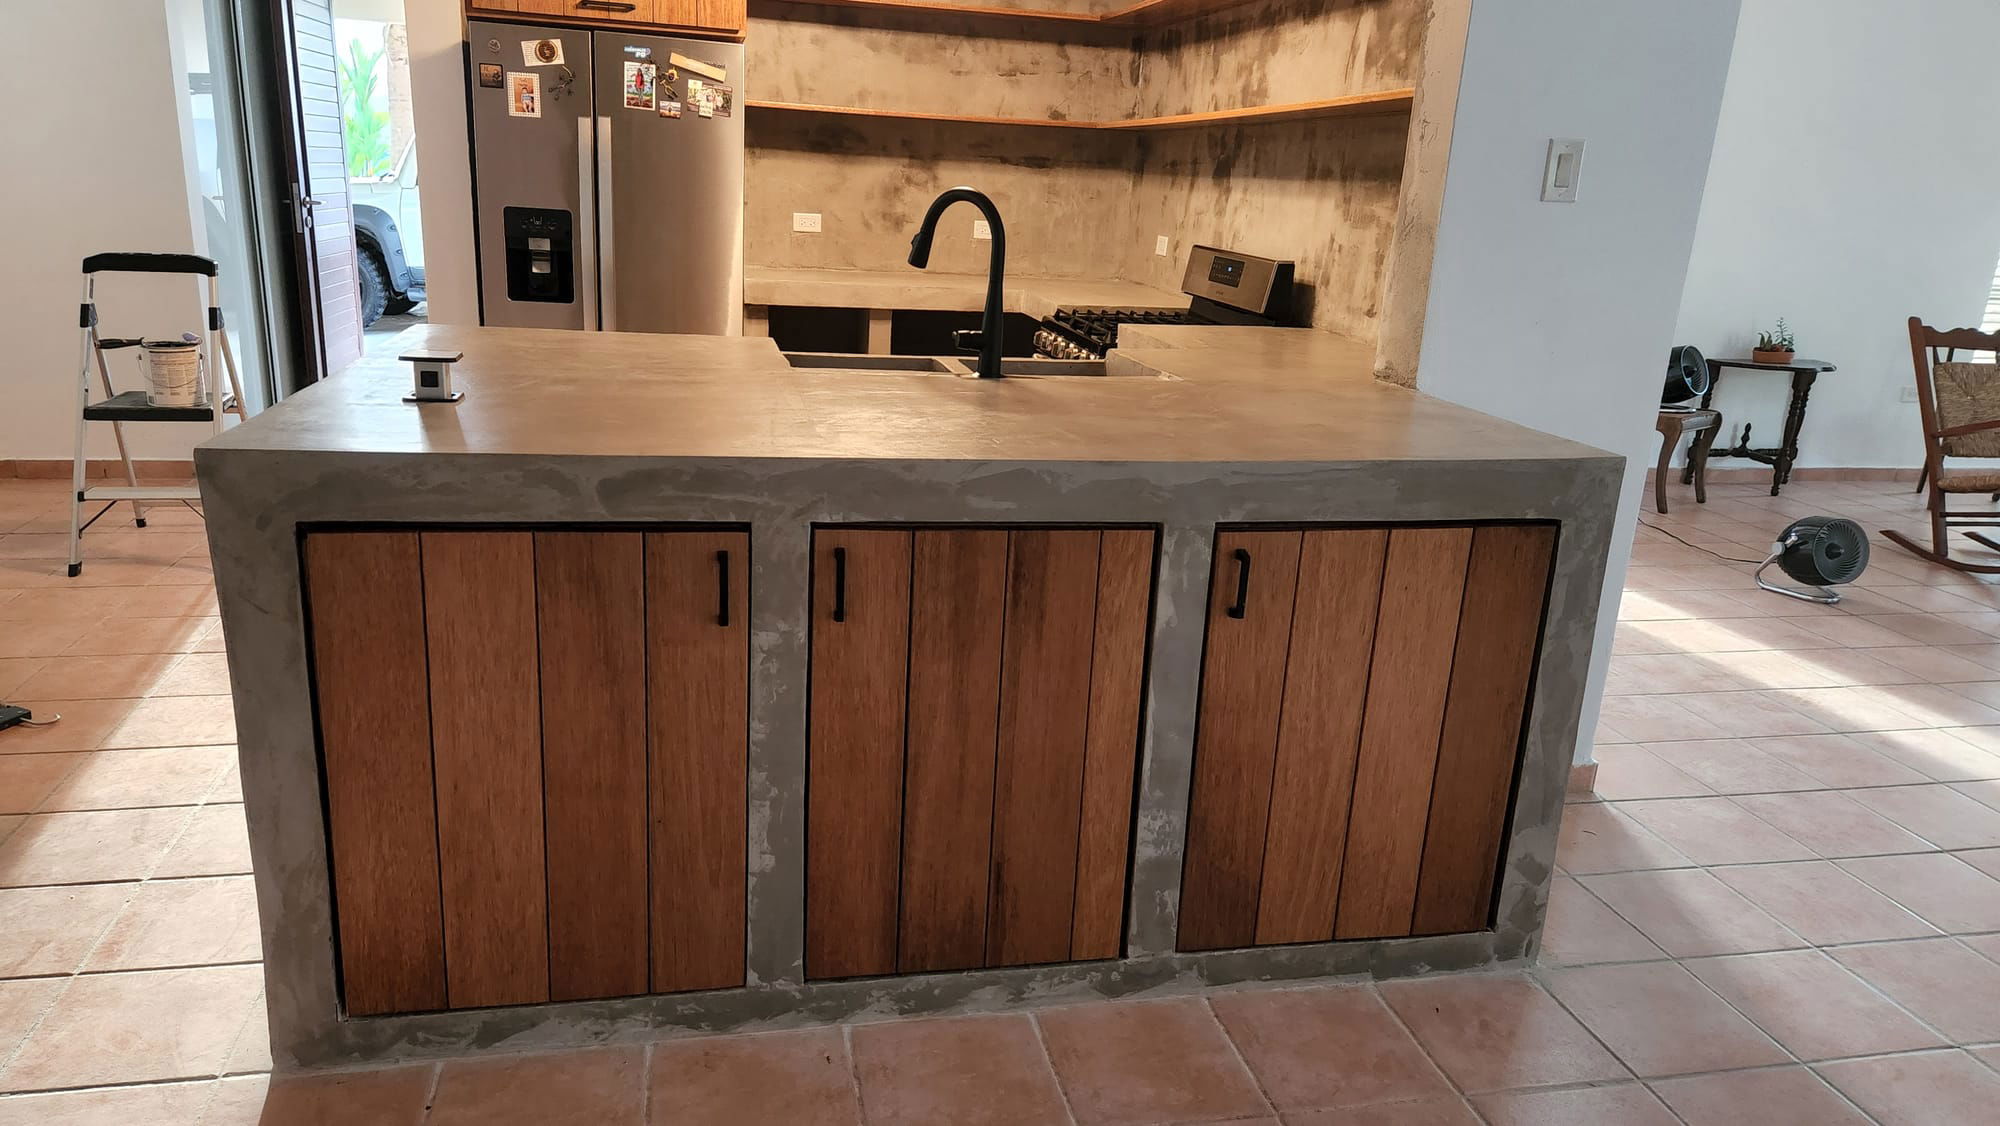 Concrete trend y any place includes your kitchen.